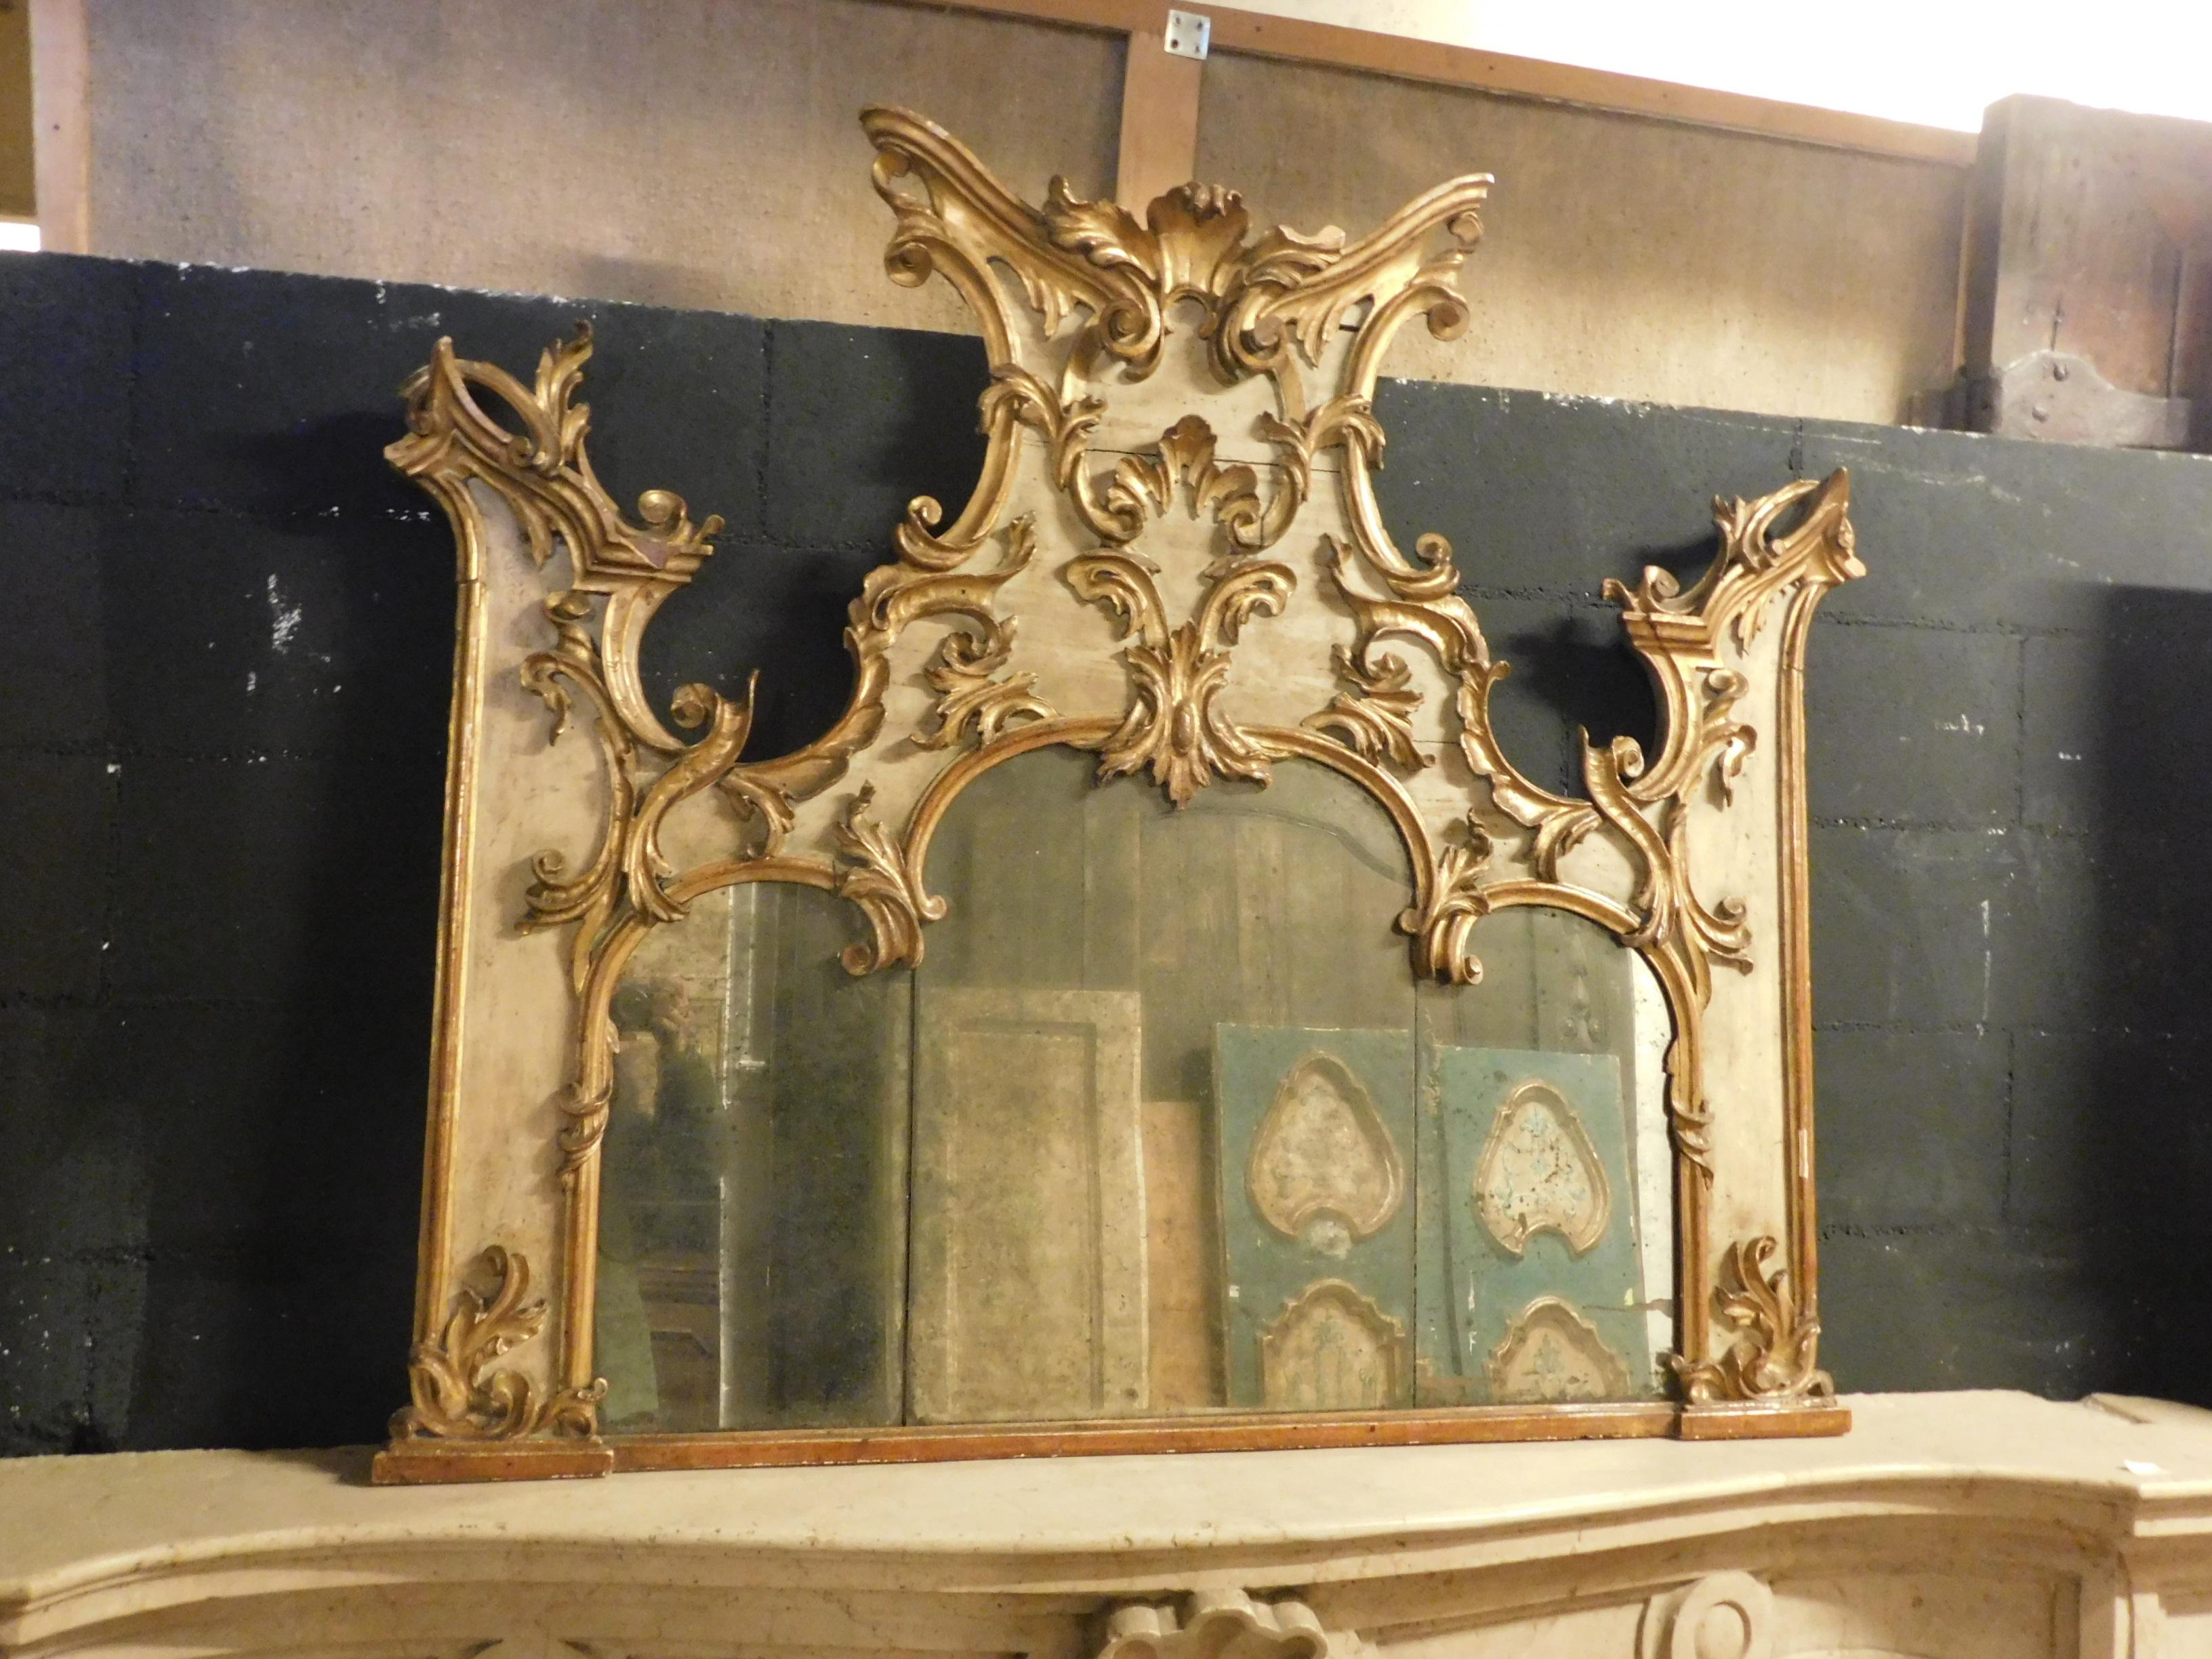 Ancient and important hand-lacquered mirror with beige and golden color, richly carved and sculpted in the part of the wooden frame, with sculptures of spiers and decorations from a rich mirror above the fireplace. Built entirely by hand in the 19th